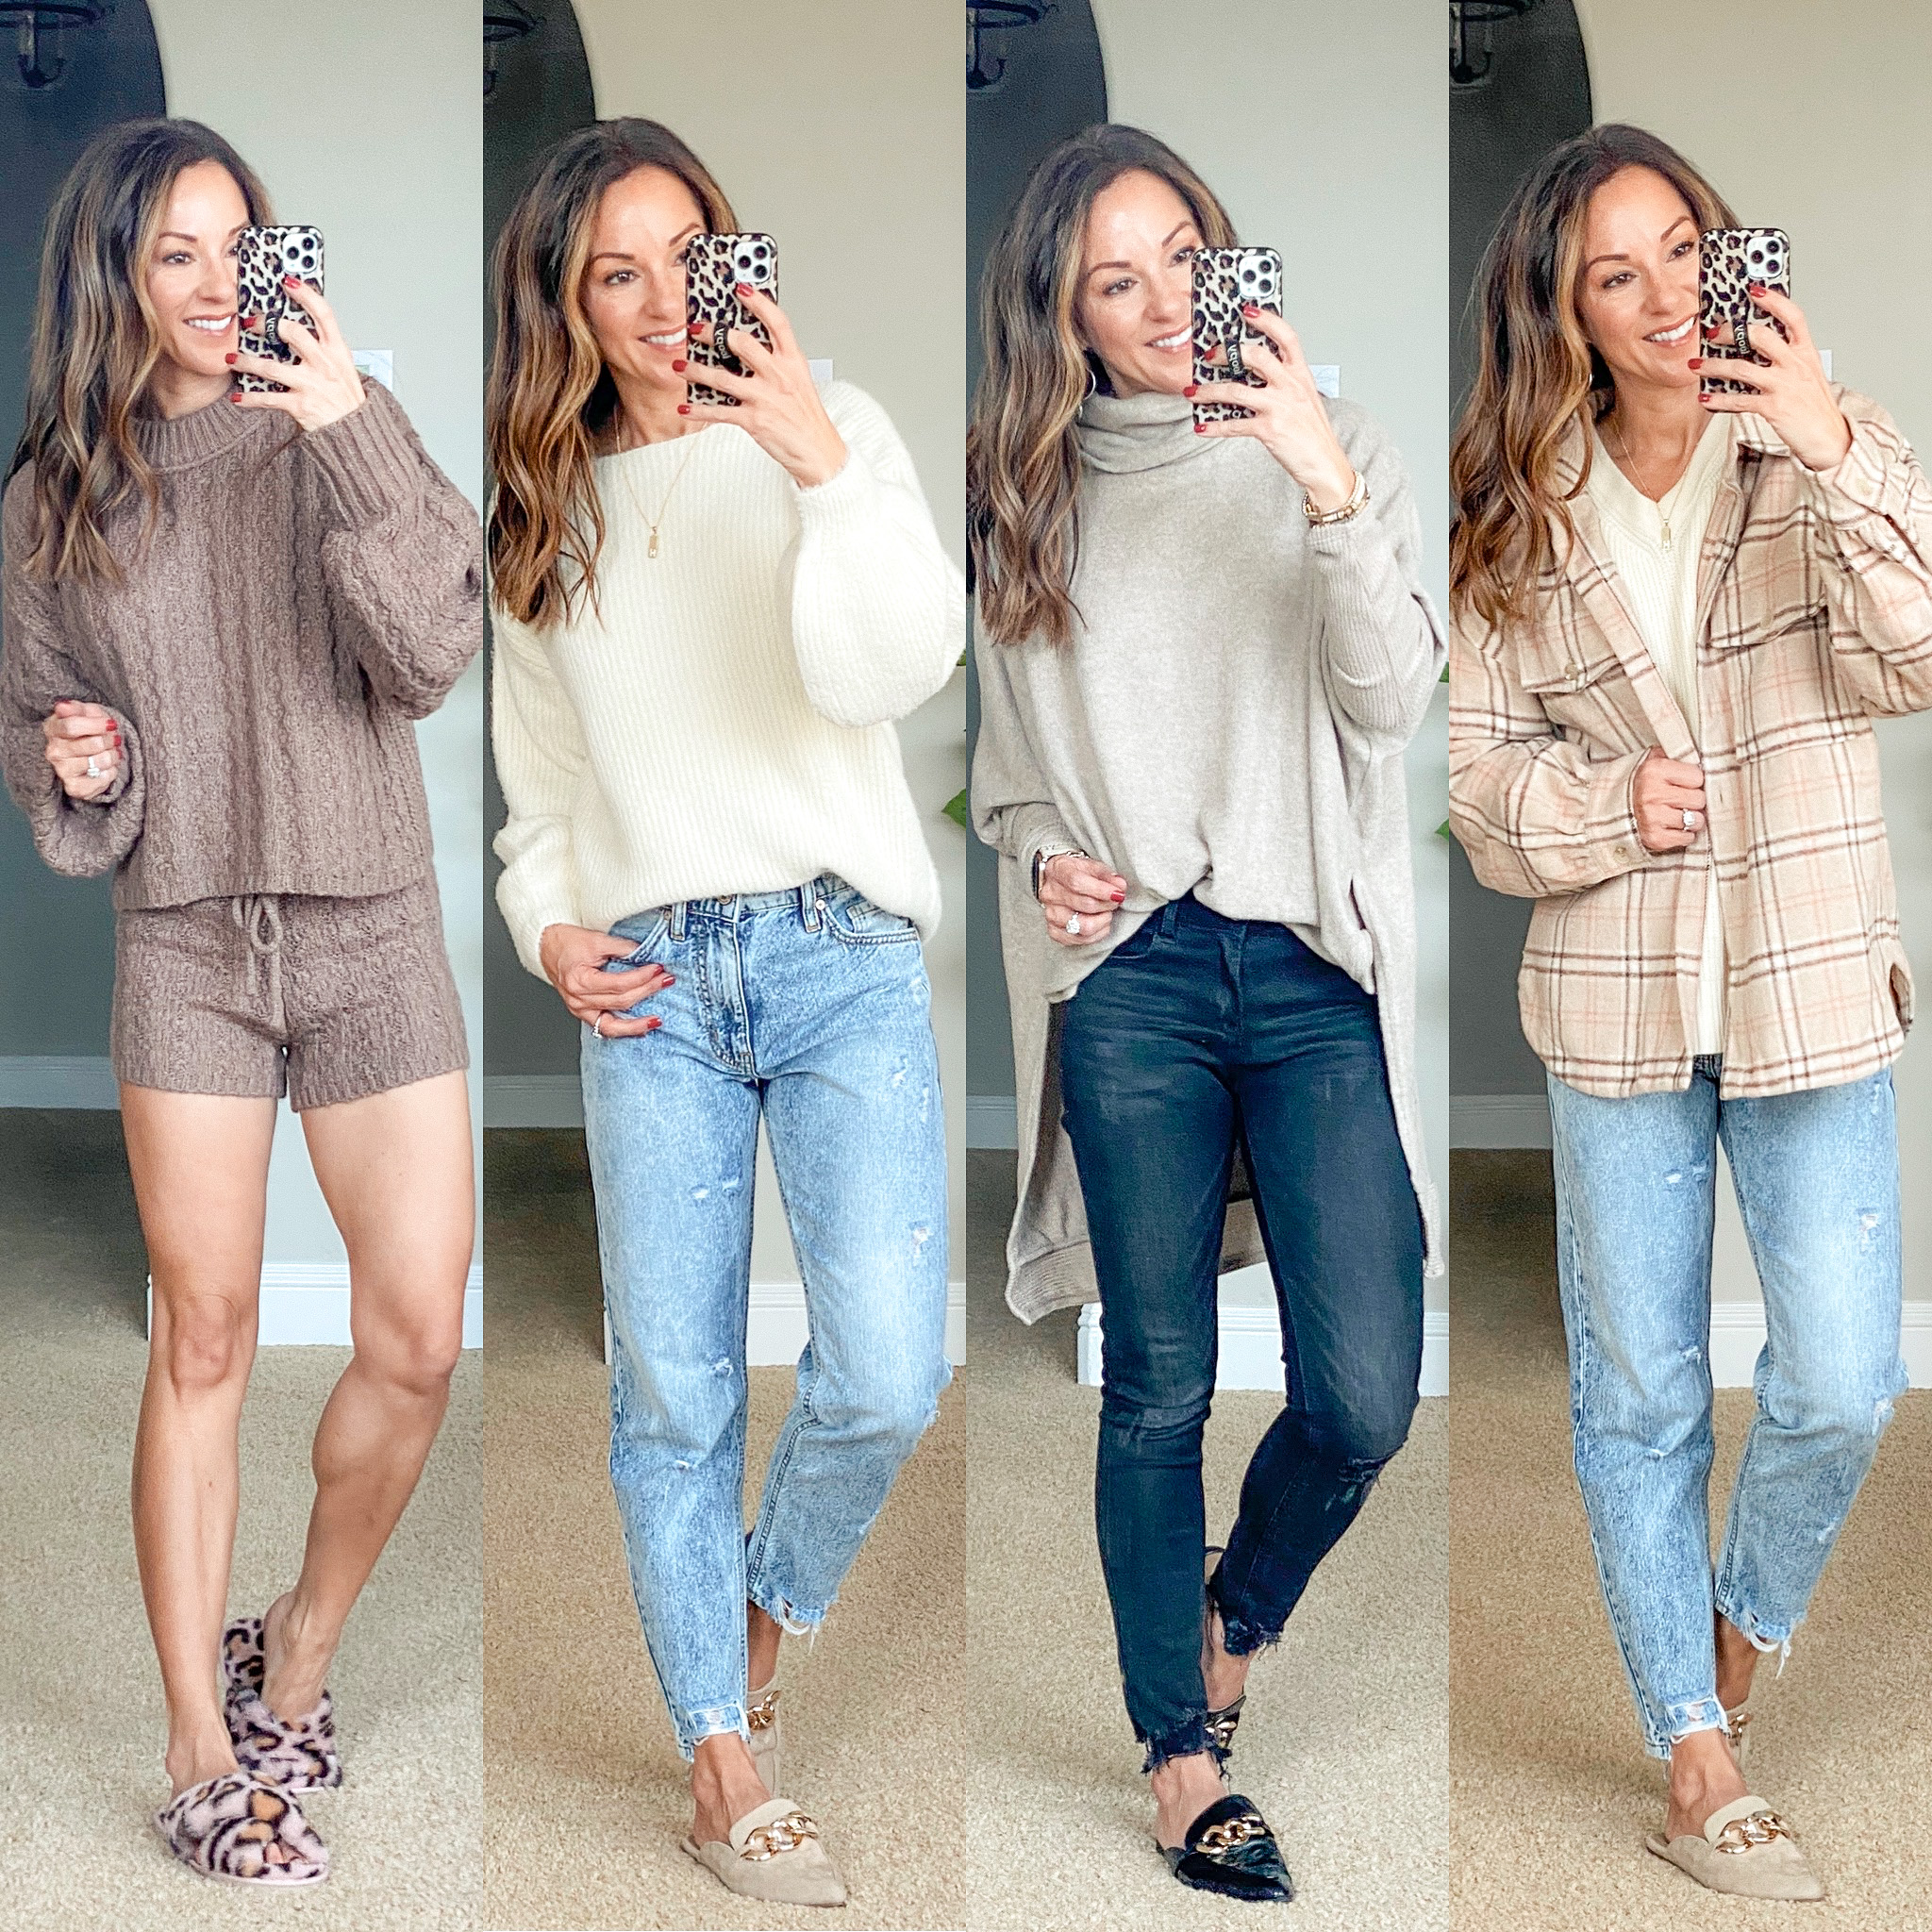 25 Ideas How To Wear Mom Jeans Complete Style Guide 2020  Chic casual  outfits winter, Casual chic style winter, Chic winter outfits